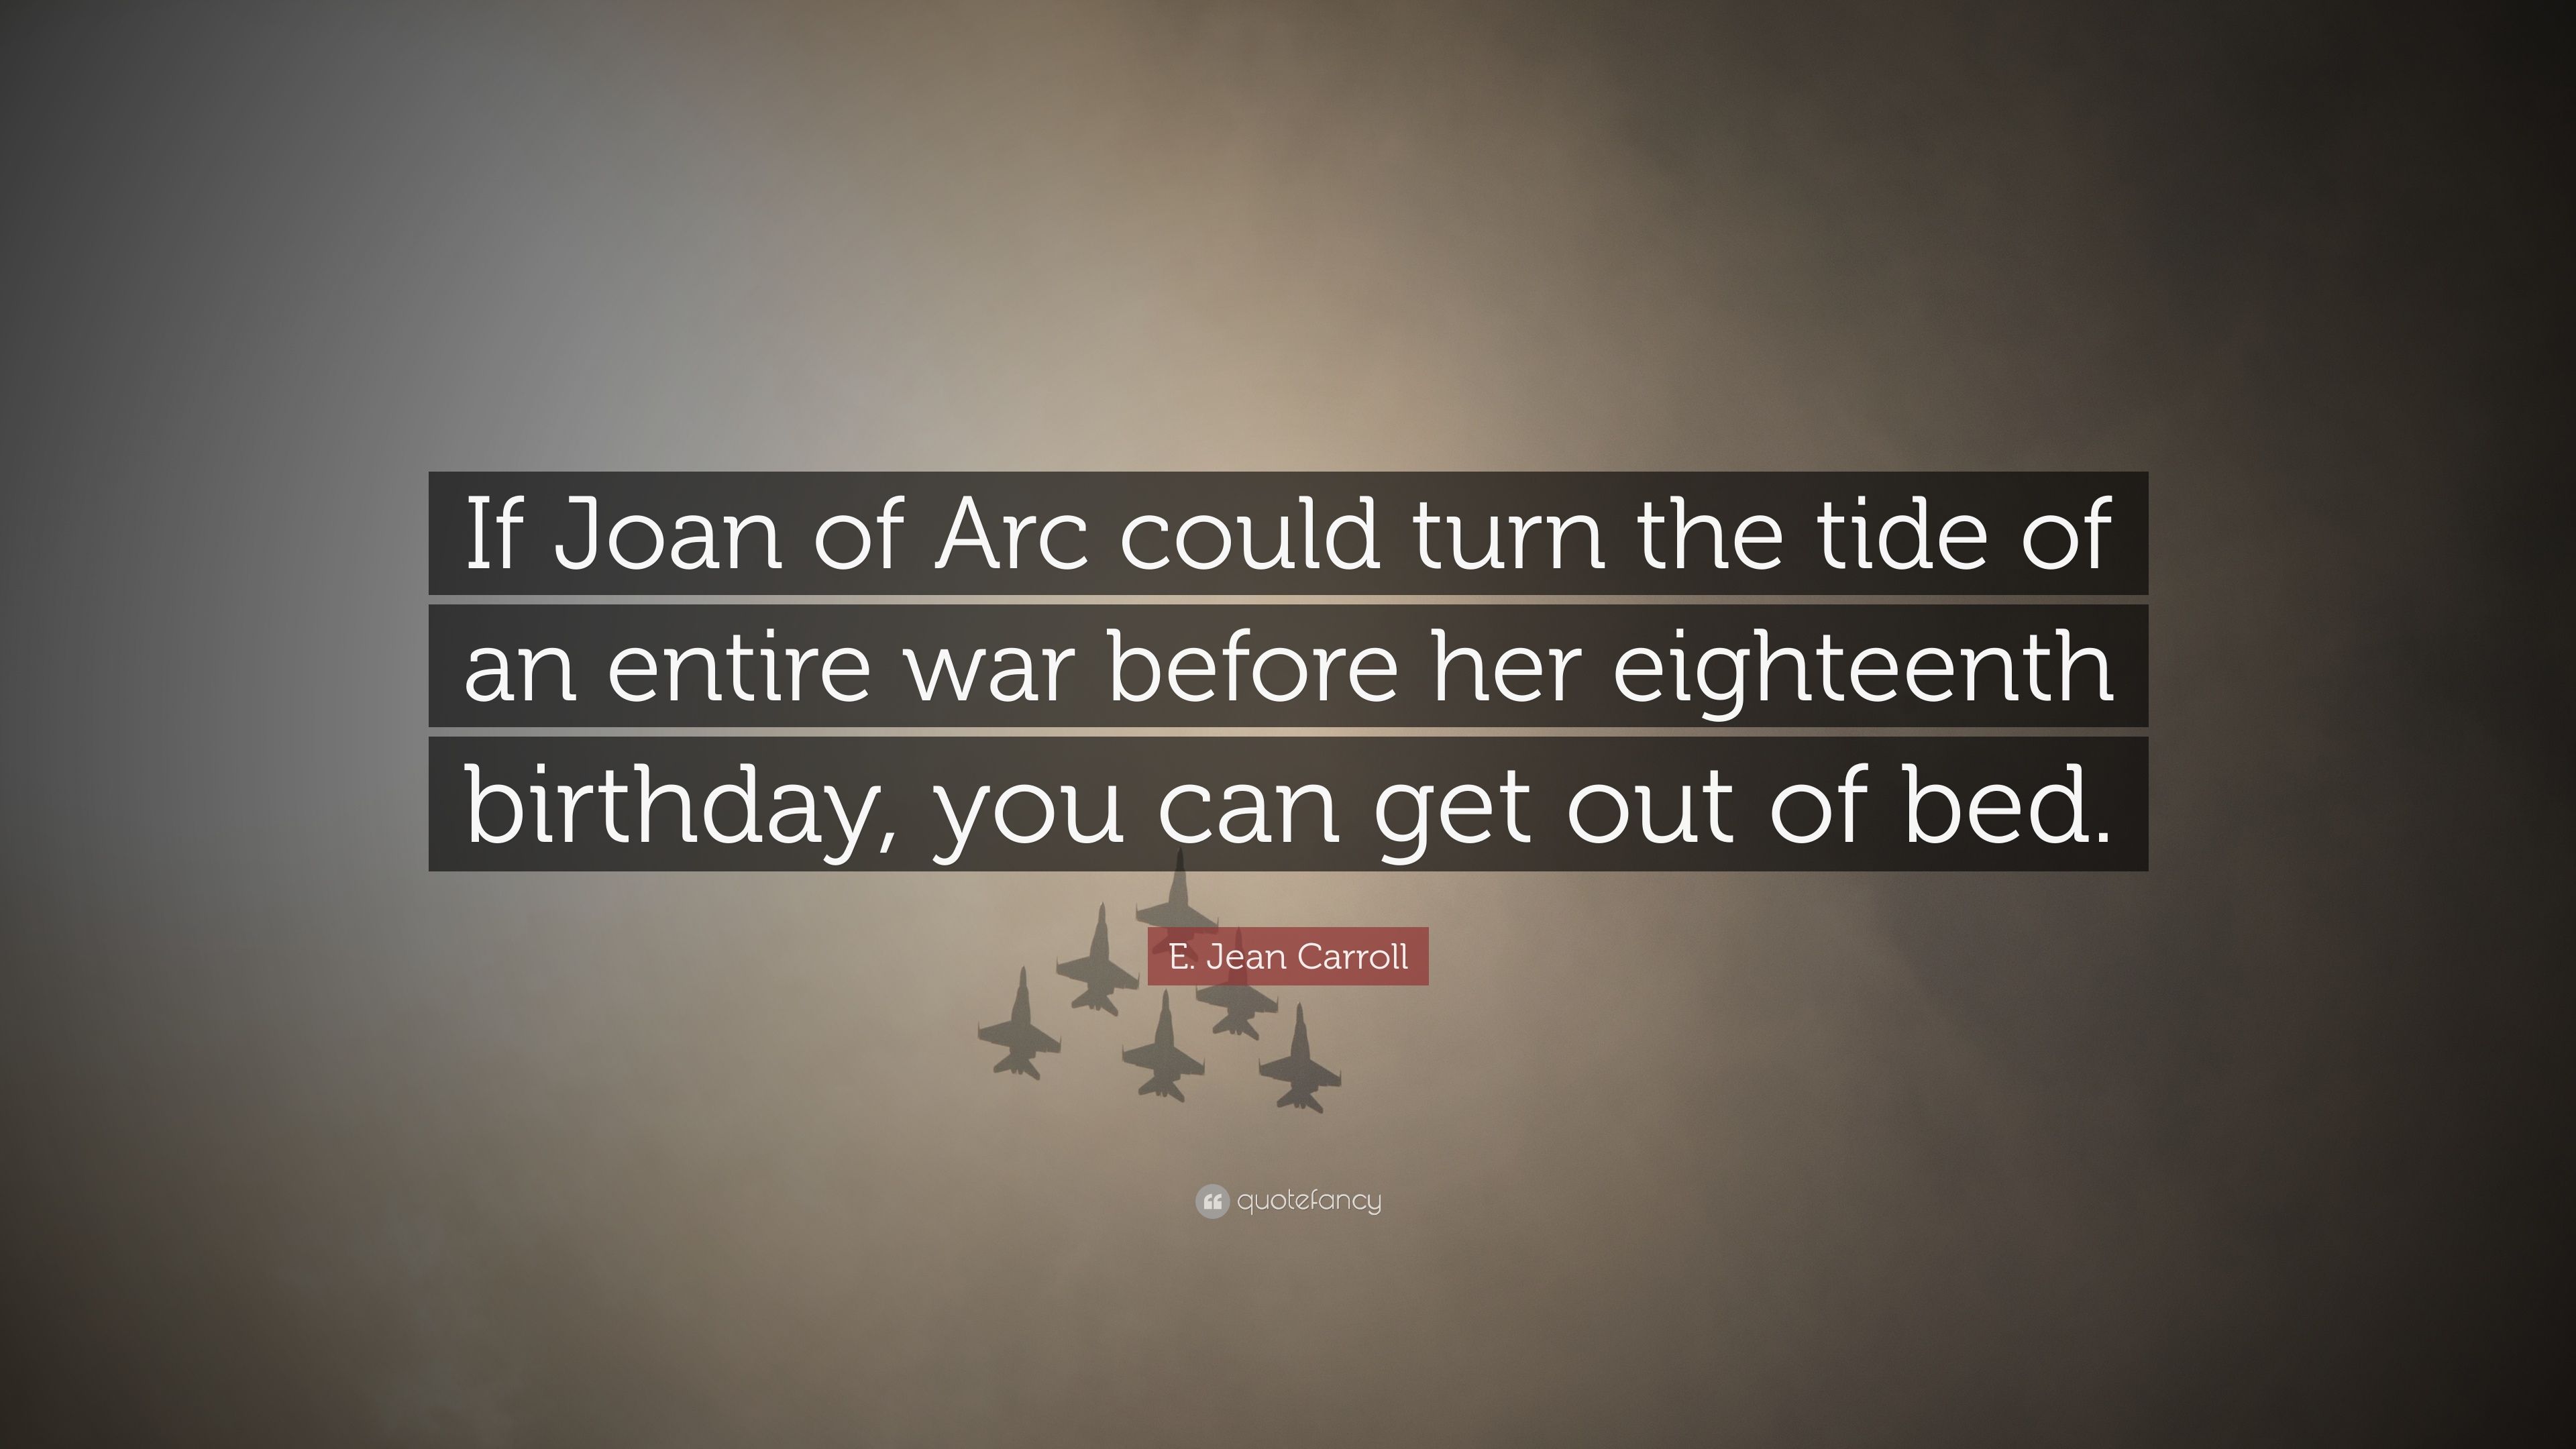 E. Jean Carroll Quote: “If Joan of Arc could turn the tide of an entire war before her eighteenth birthday, you can get out of bed.” (7 wallpaper)